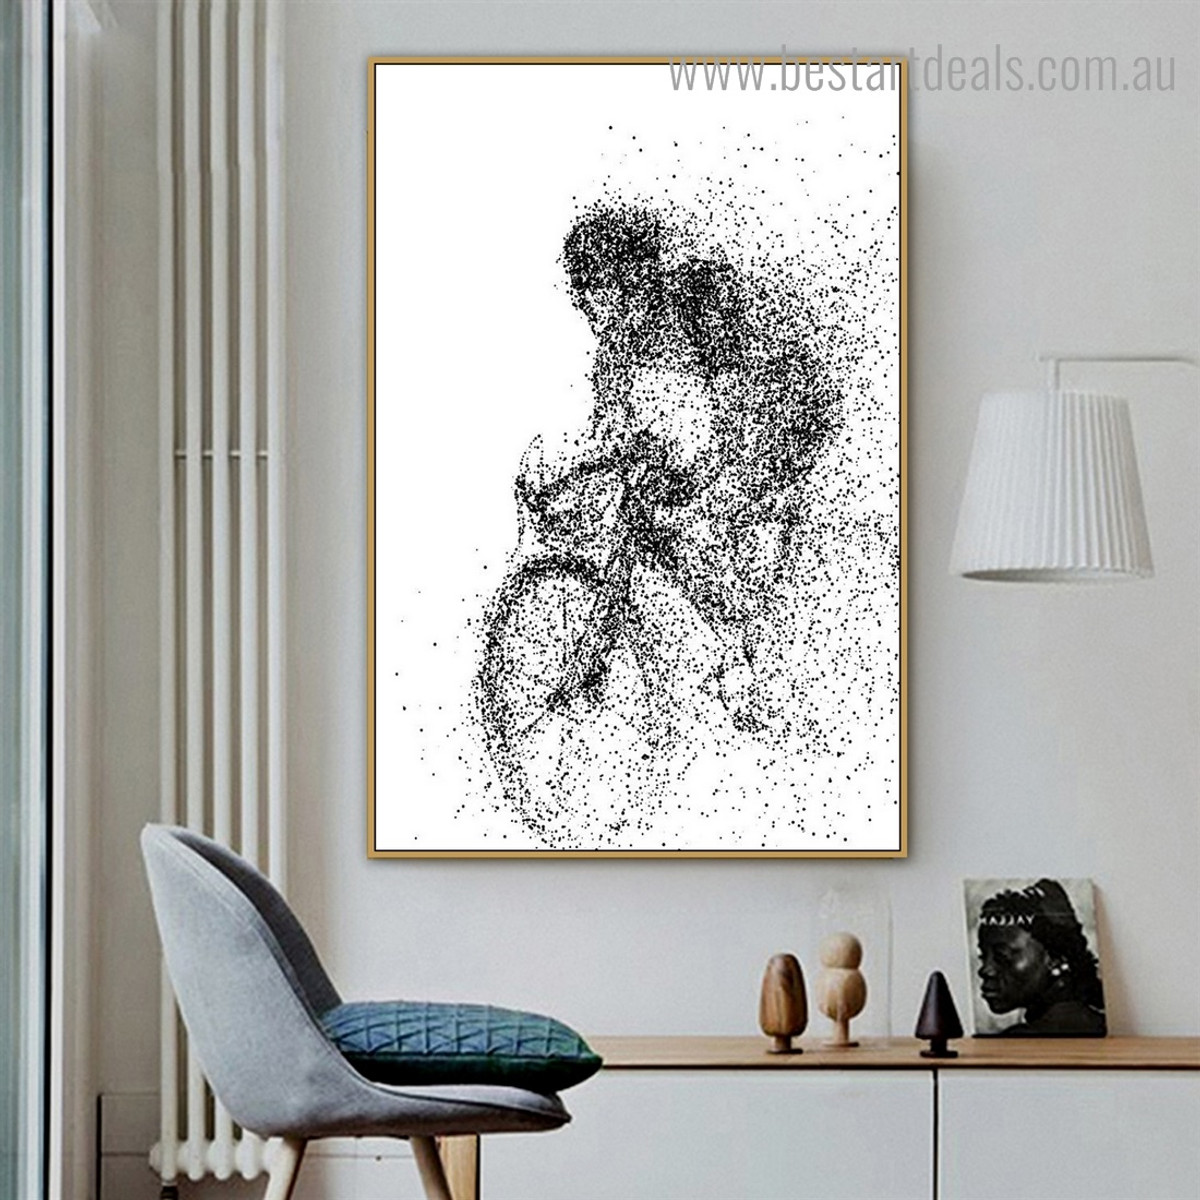 Cycling Man Abstract Illustration Modern Framed Artwork Portrait Canvas Print for Room Wall Ornament